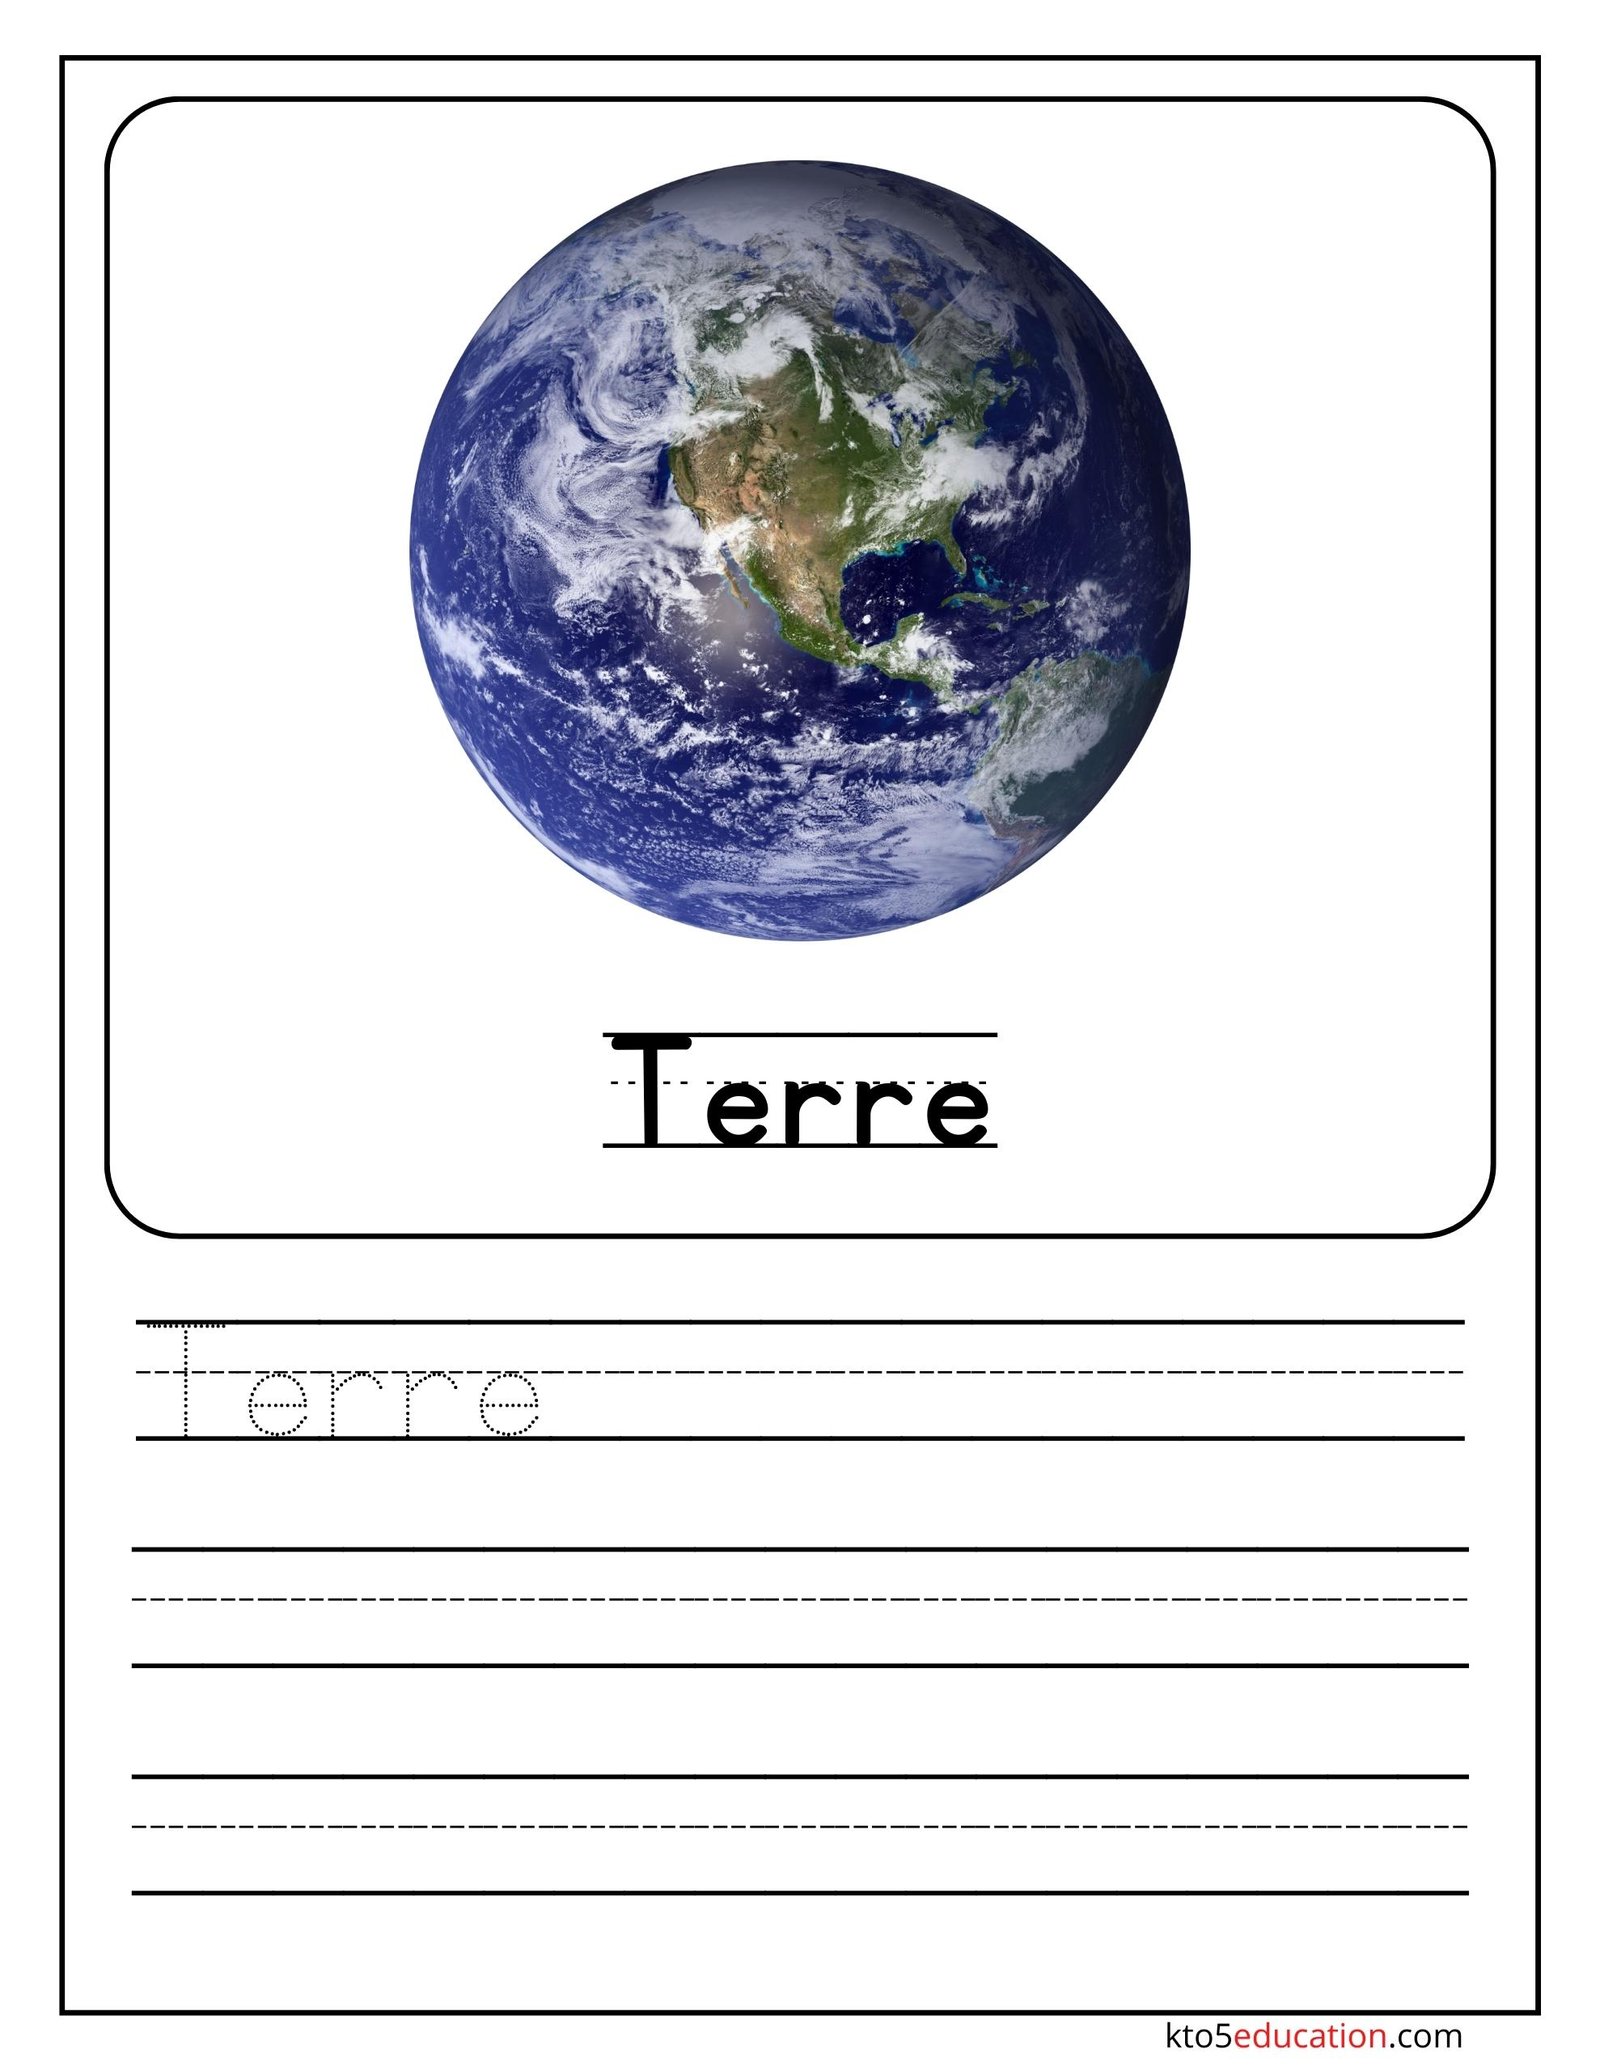 Earth Planet Name Practice in French Language Worksheet